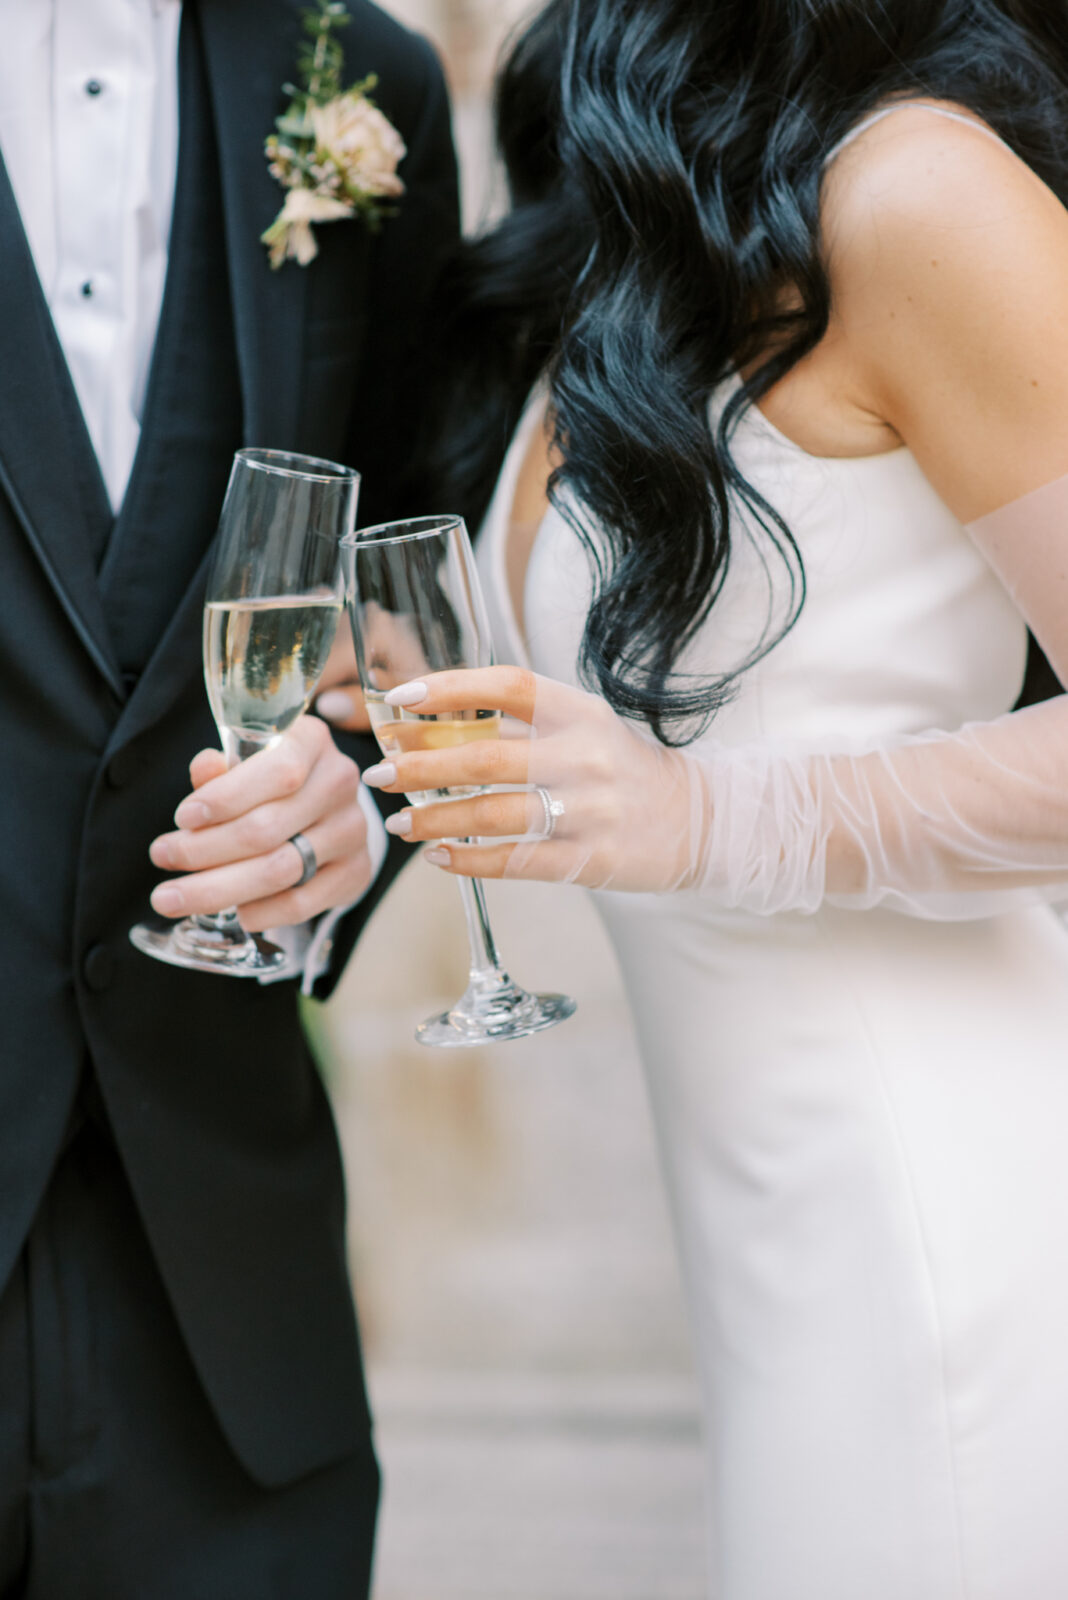 Bride and groom clinking champagne glasses, modern bride and groom portraits, chic sheer bridal gloves